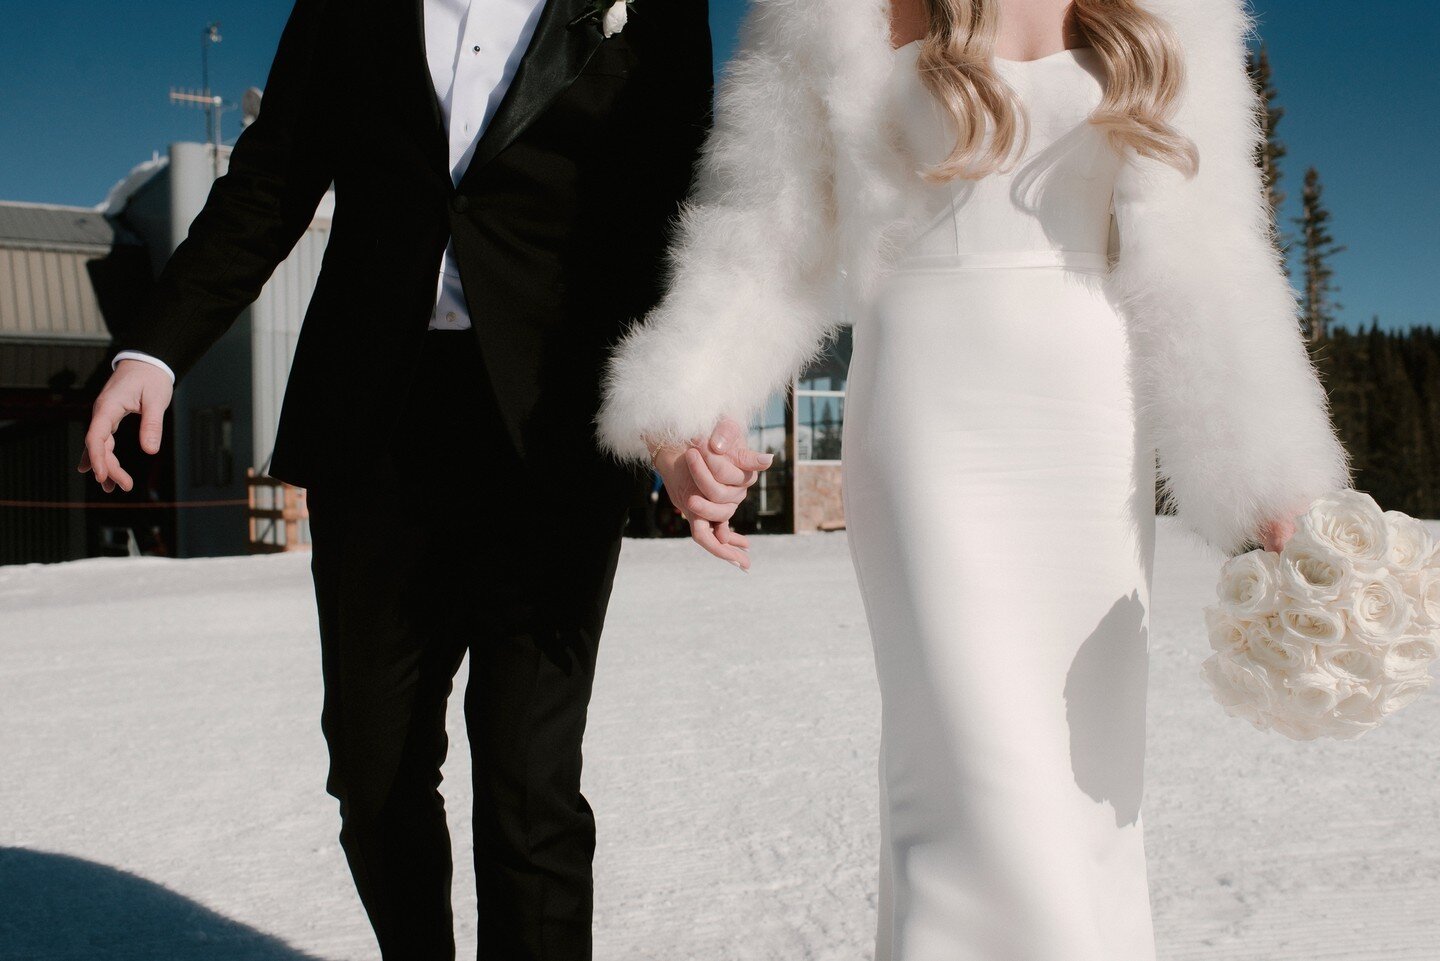 Winter vibes for your Wednesday brought to you by Taylor and Blake. ❤️&zwj;🔥⁠
⁠
#JosephWestPhotography ⁠
⁠
Planning: ⁠@somethingblue.events ⁠
Location: ⁠@thelittlenell ⁠
Floral and Decor: ⁠@carolynsflowers ⁠
Hair and Makeup: @vanessa.vieni ⁠
Music: 